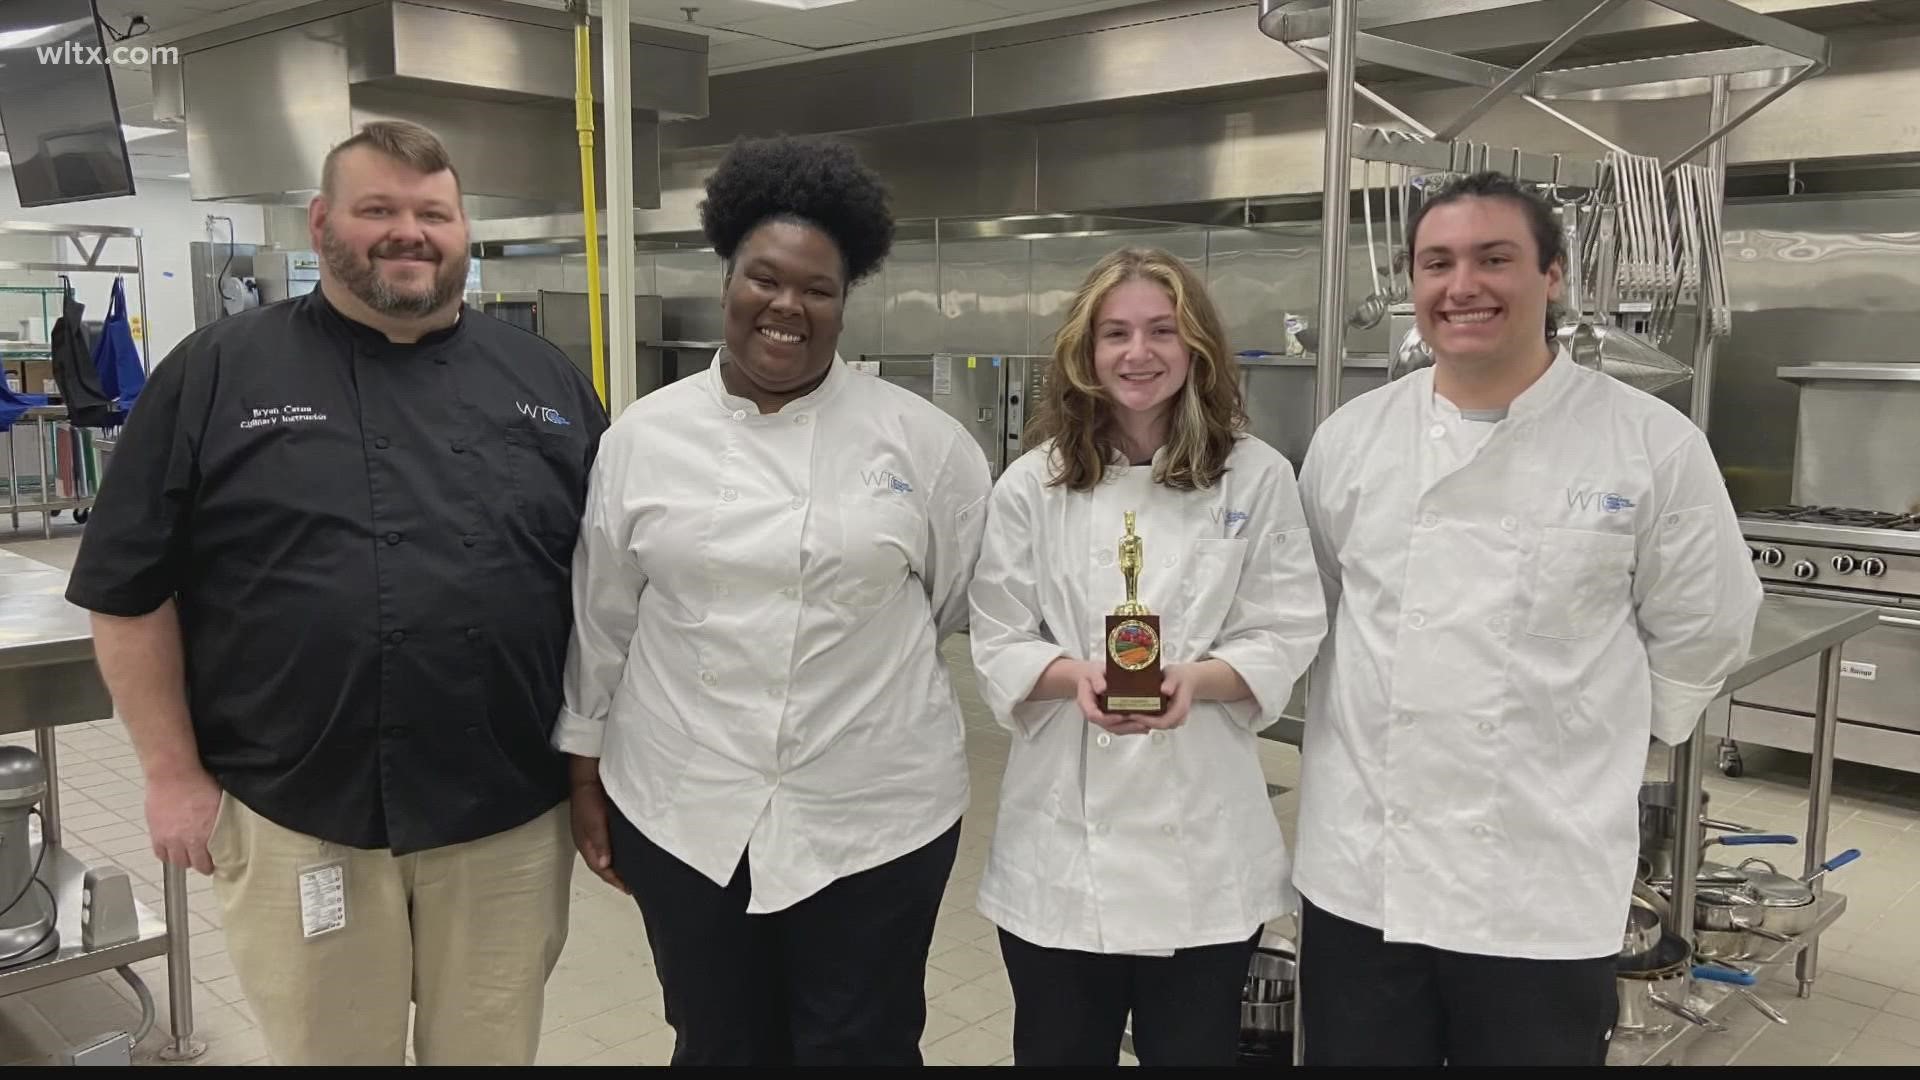 Not only did they walk out with a winning dish, but with a $10,000 scholarship each.